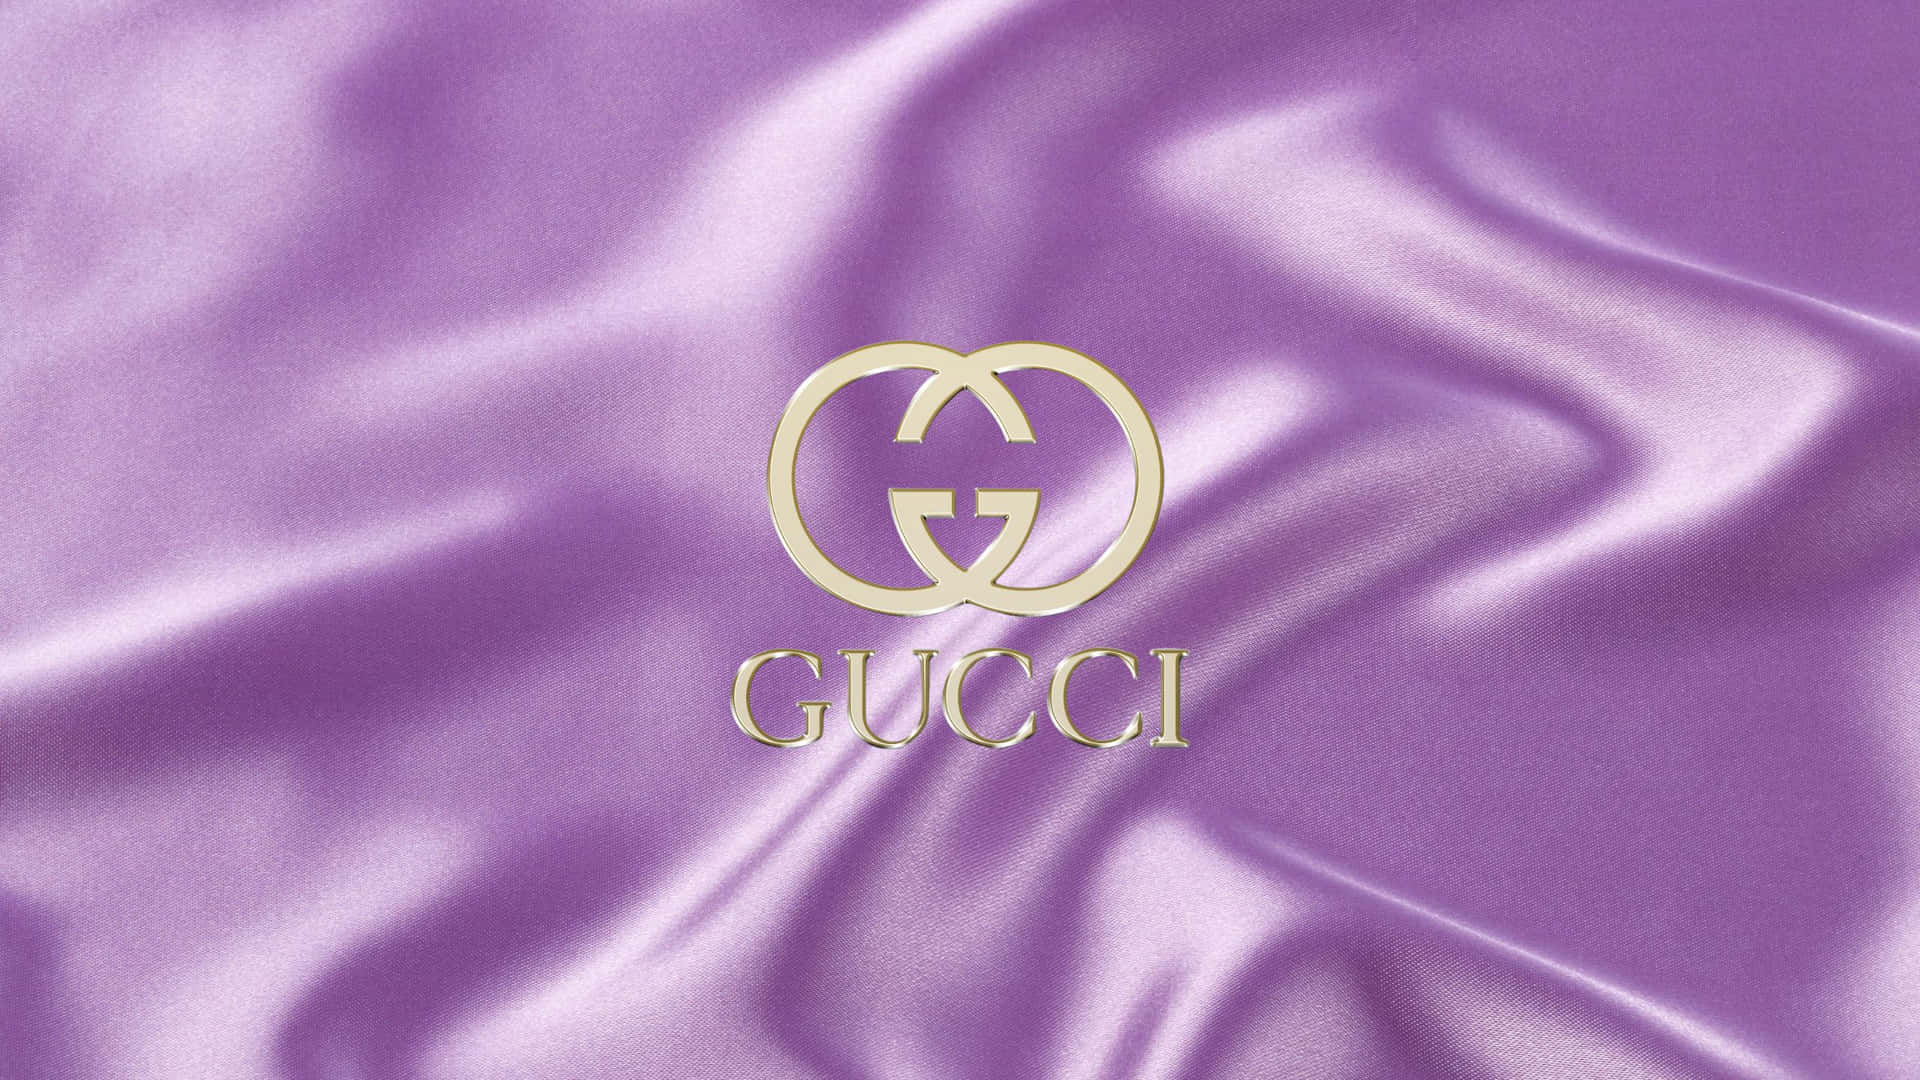 100+] Gucci Backgrounds